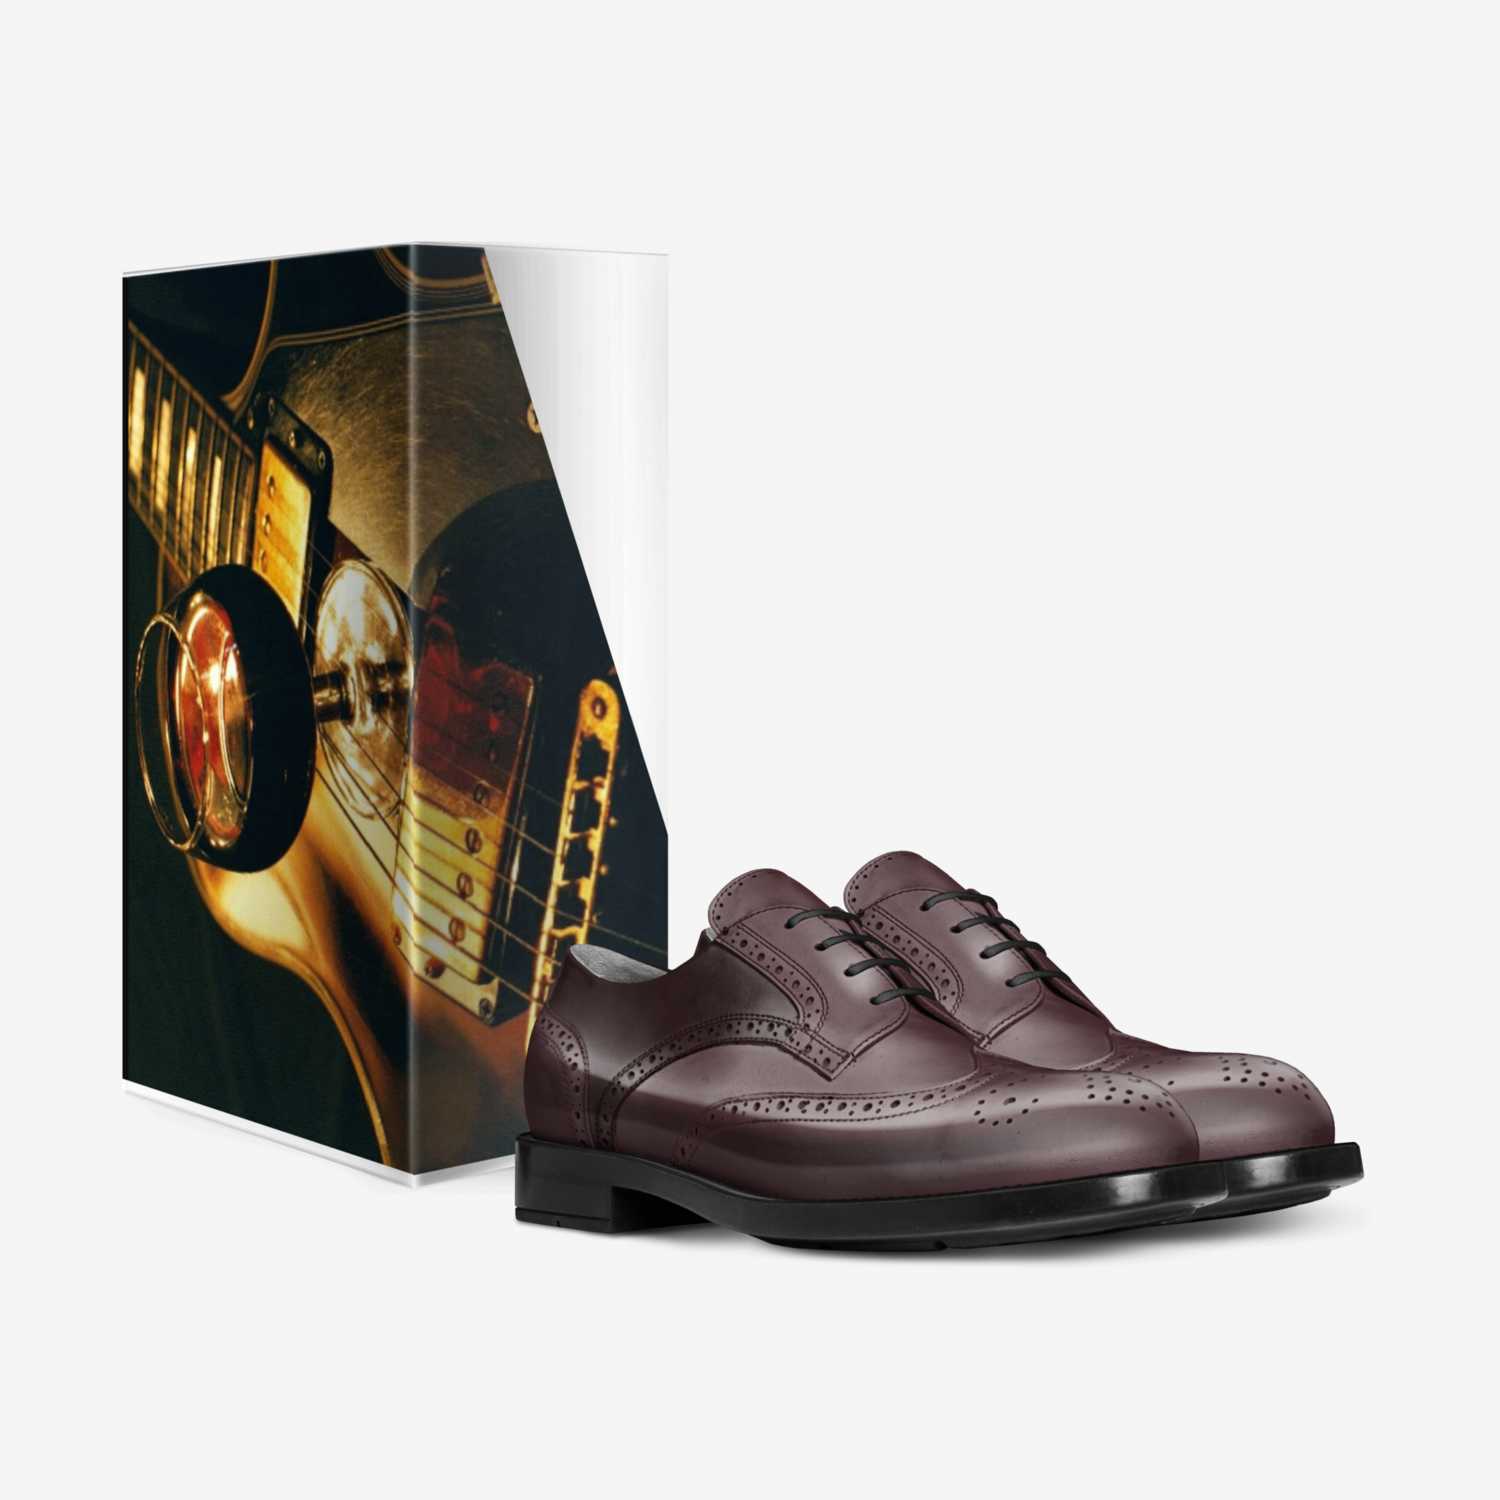 Slow wine custom made in Italy shoes by Lamar Lomack | Box view